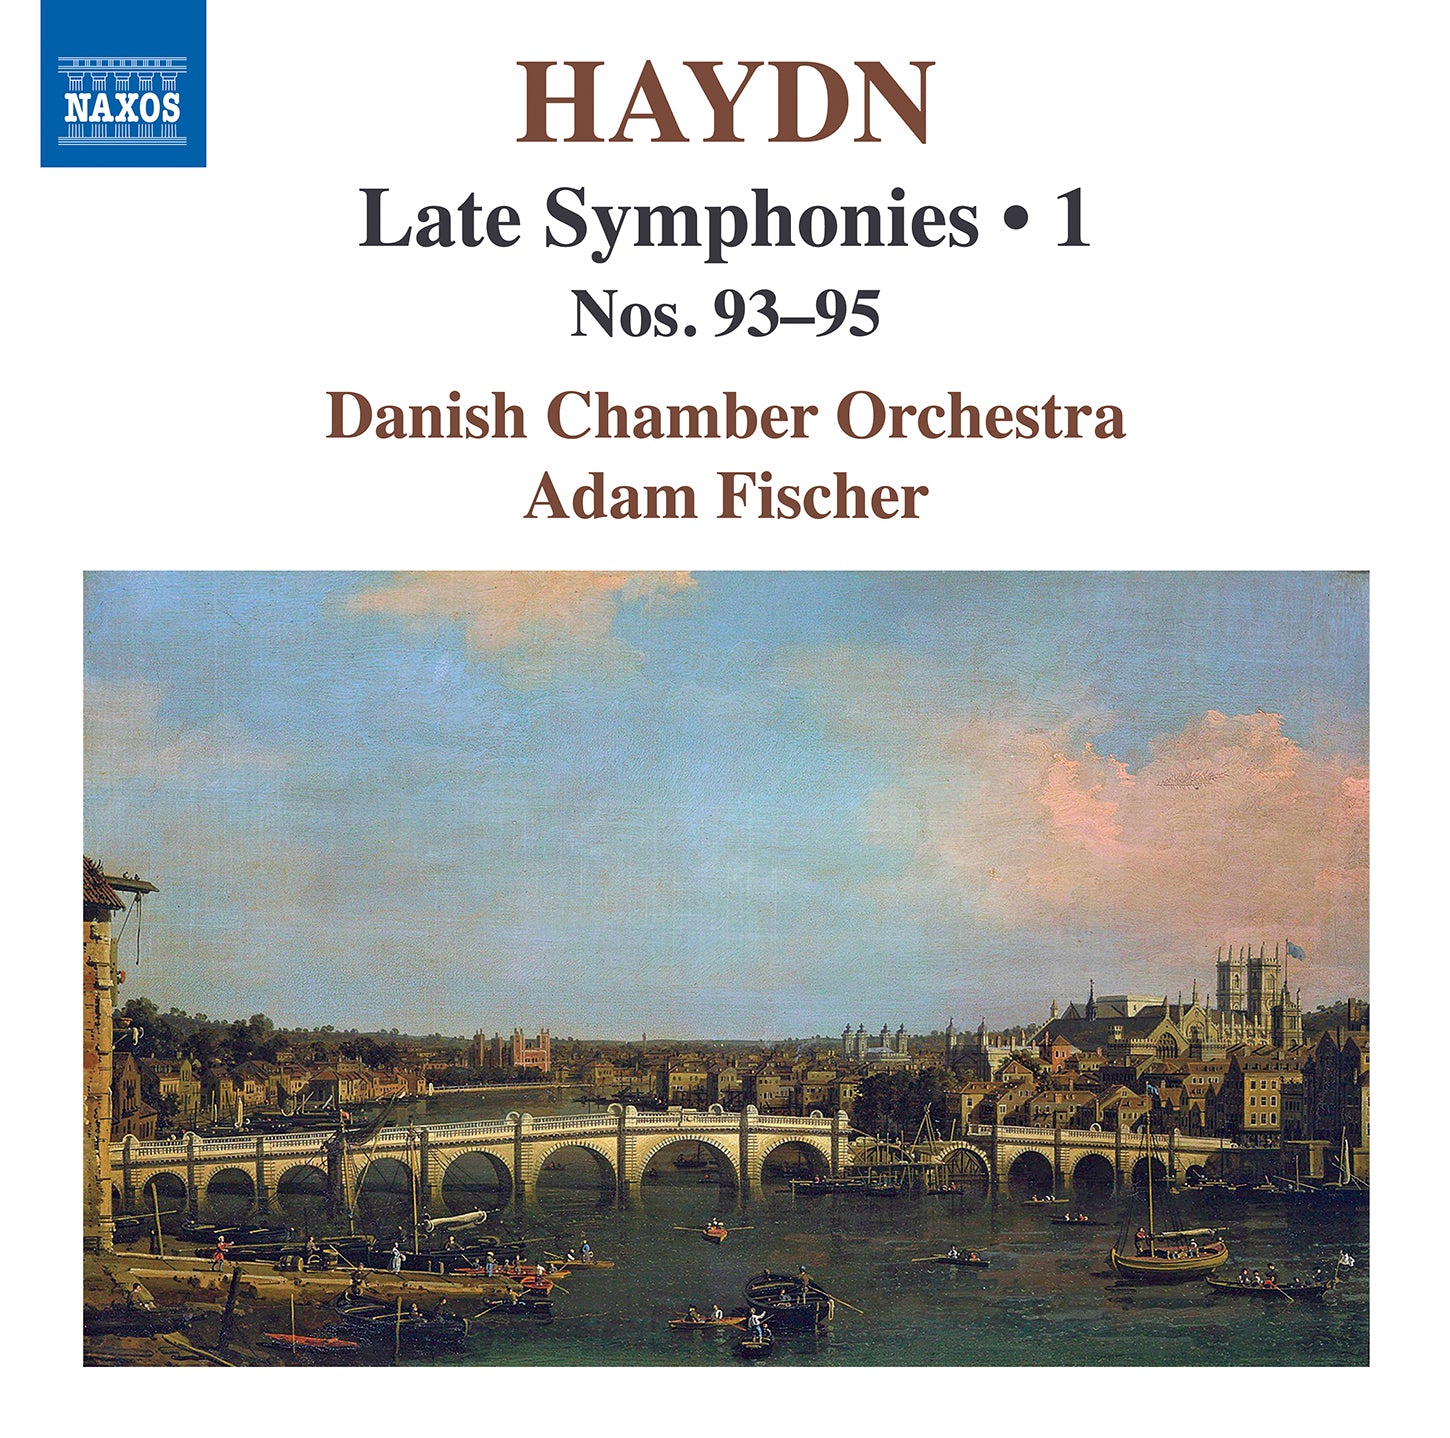 Haydn: Late Symphonies, Vol. 1 - Symphonies Nos. 93-95 / Fischer, Danish Chamber Orchestra